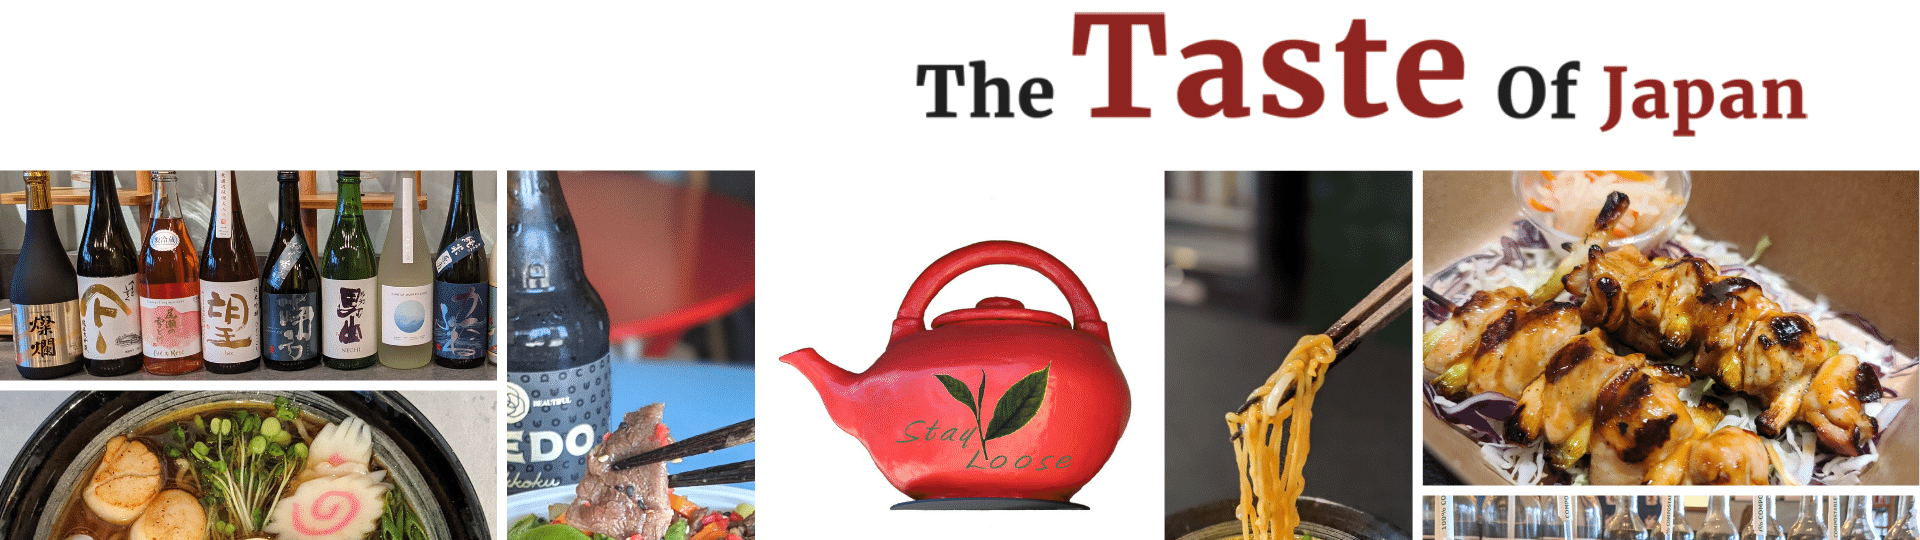 the taste of tea. the taste of japan. 109 north street healdsburg the taste of tea dot com. 707 431 1995. red tea pot with stay loose saying. bowls of ramen, grilled chicken, sake, beef and veegie bowl, and sweet tea drinks and boba